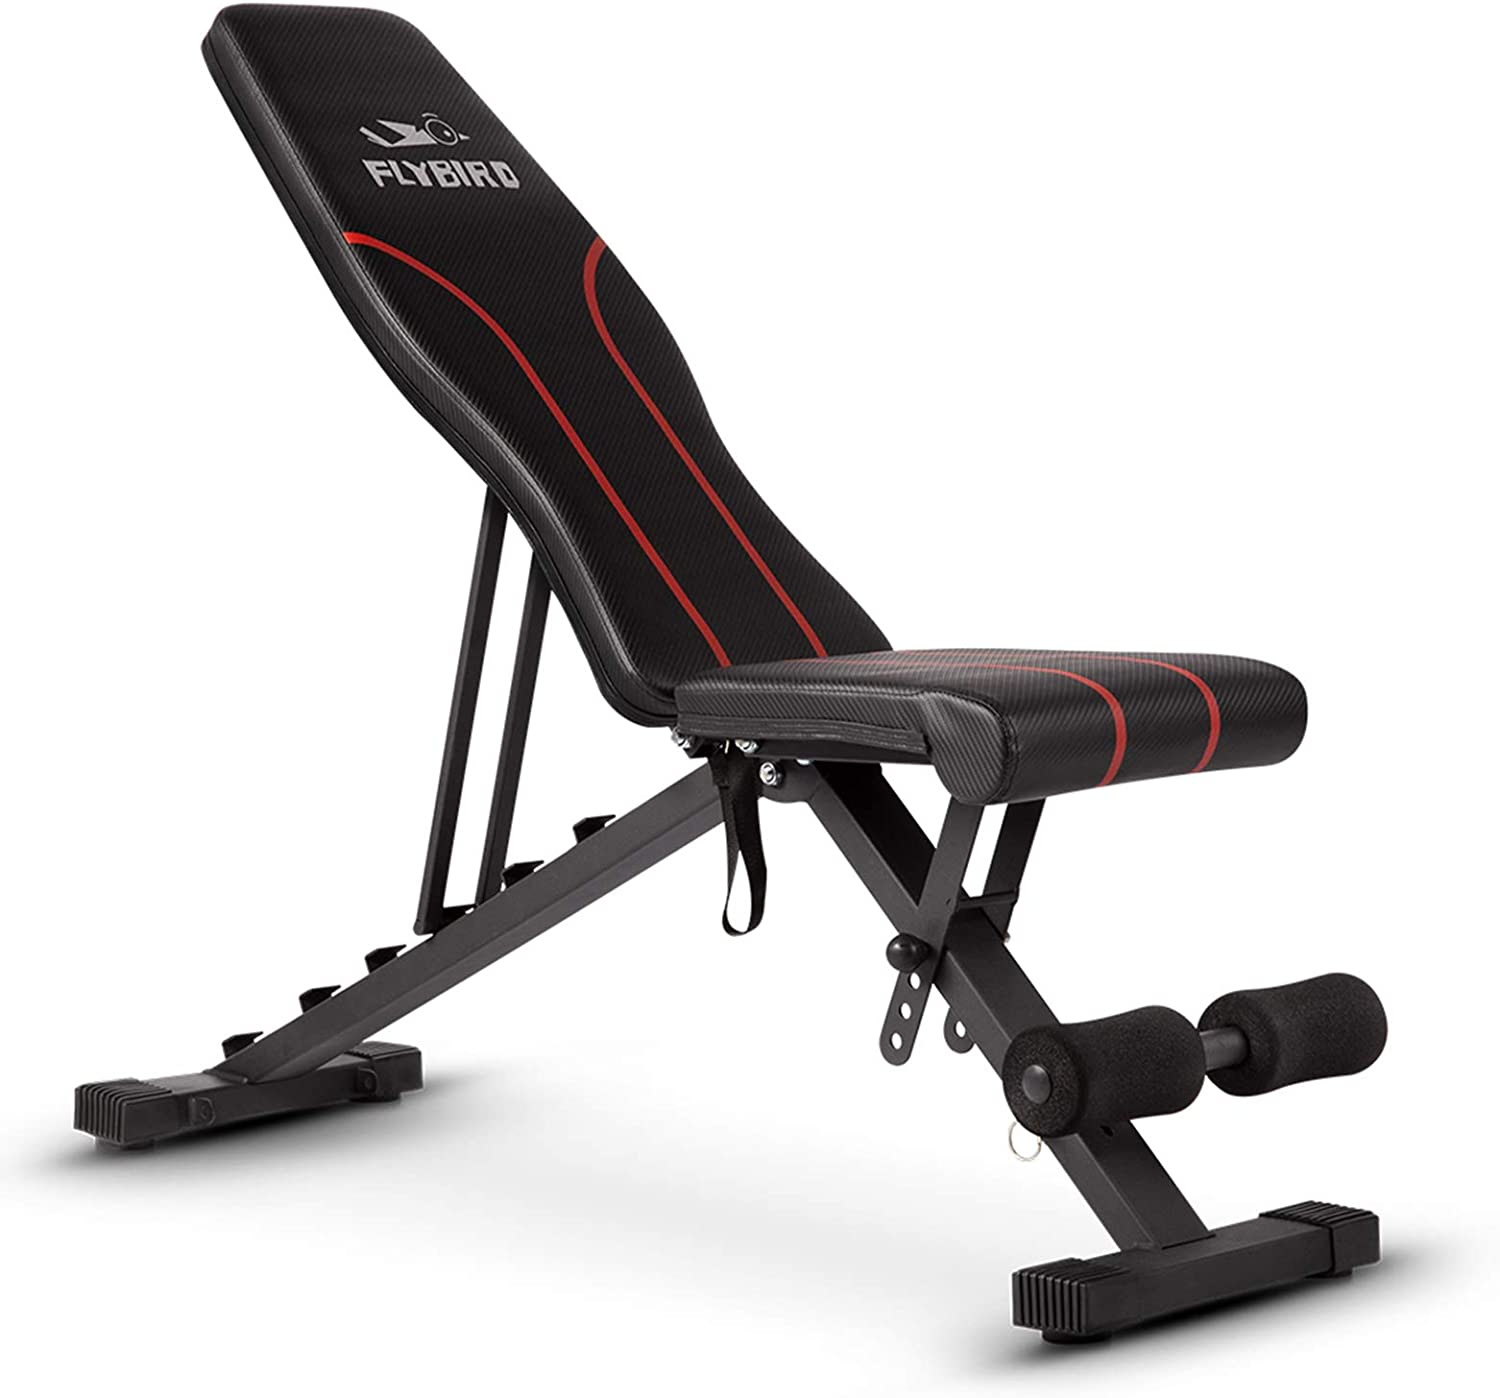 FLYBIRD Adjustable Multi-Purpose Foldable Incline Workout Bench. 2000 units. 